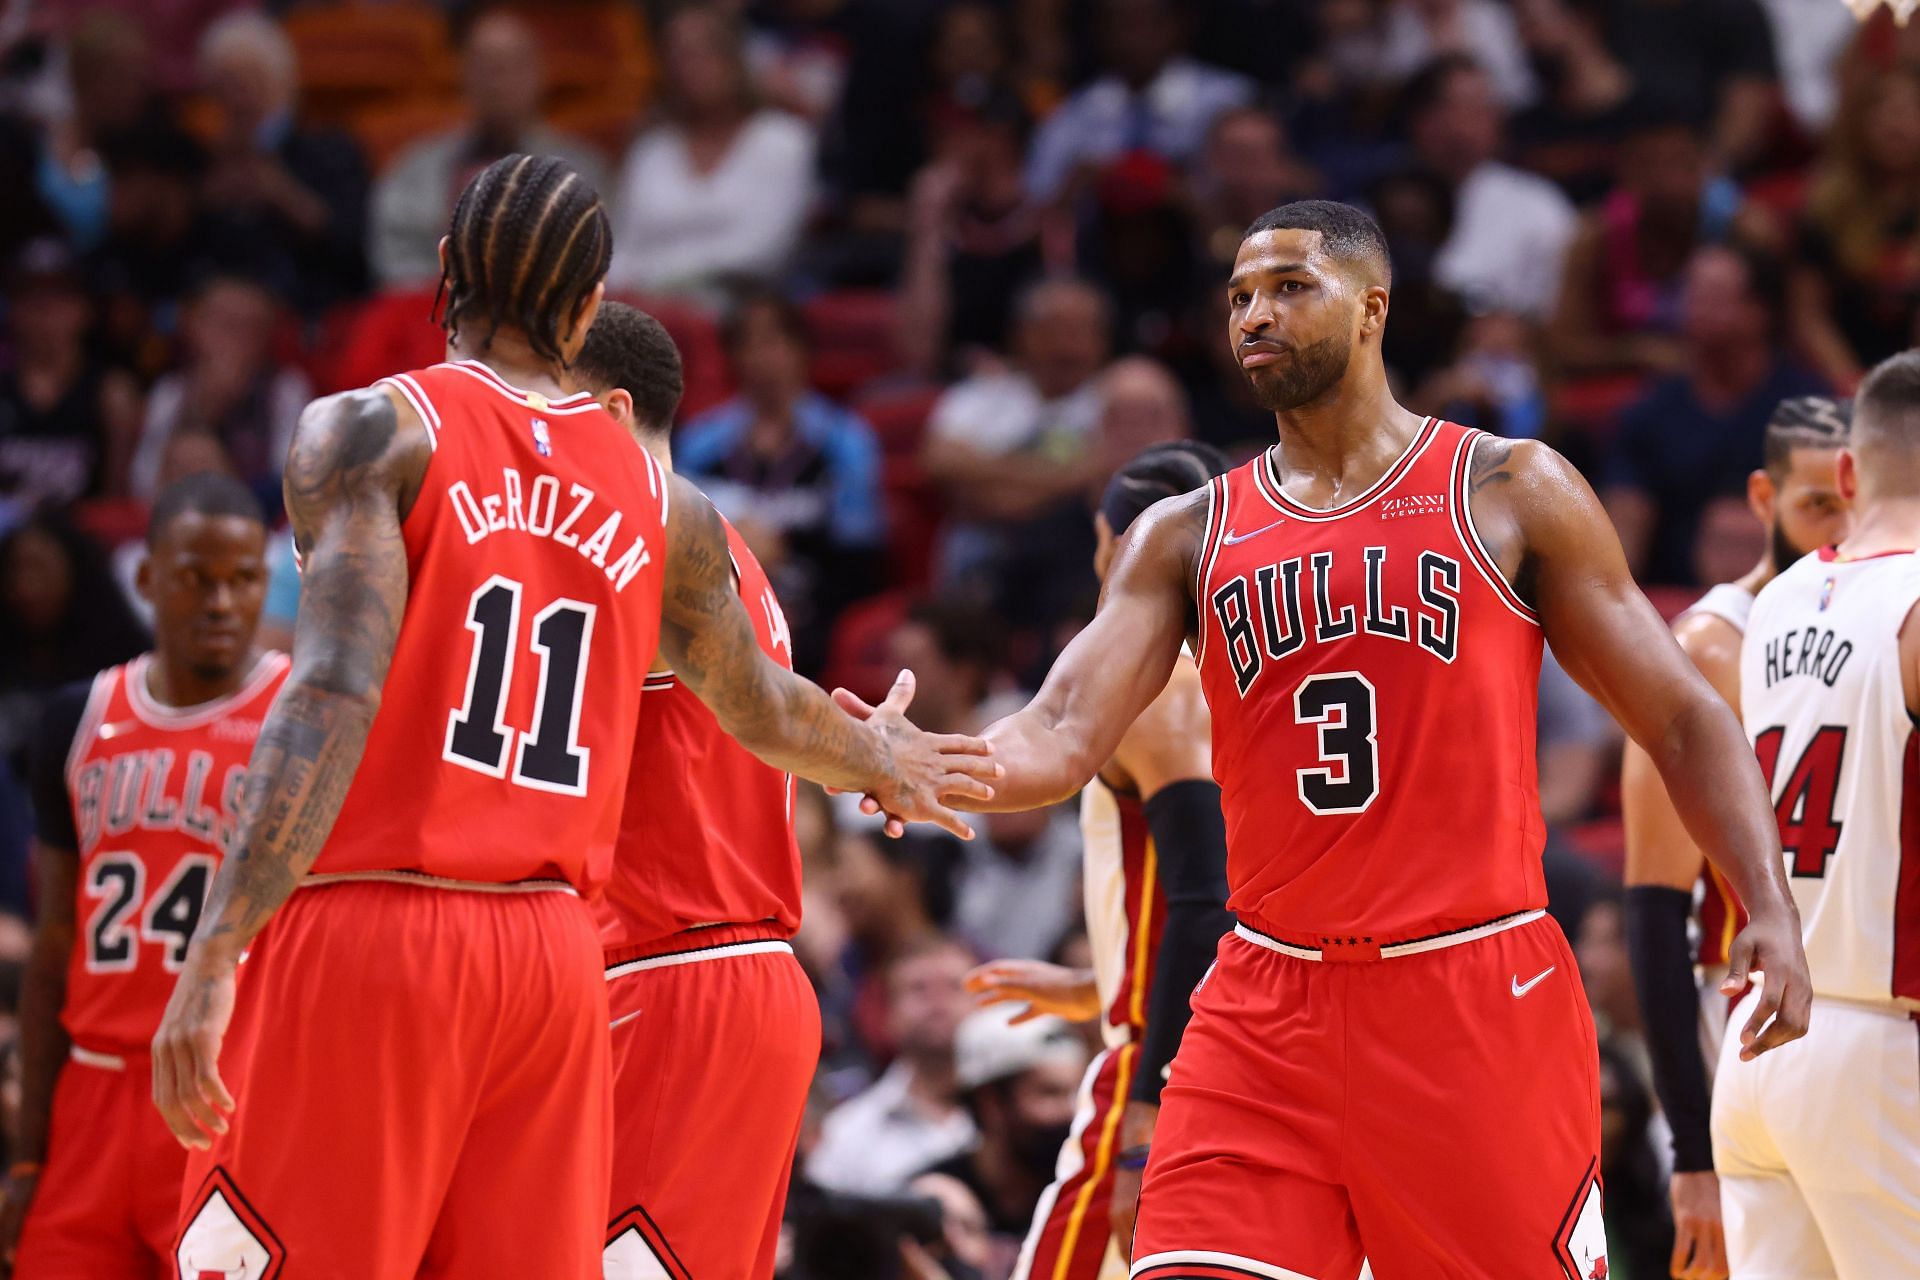 The Bulls need more output from their second unit.